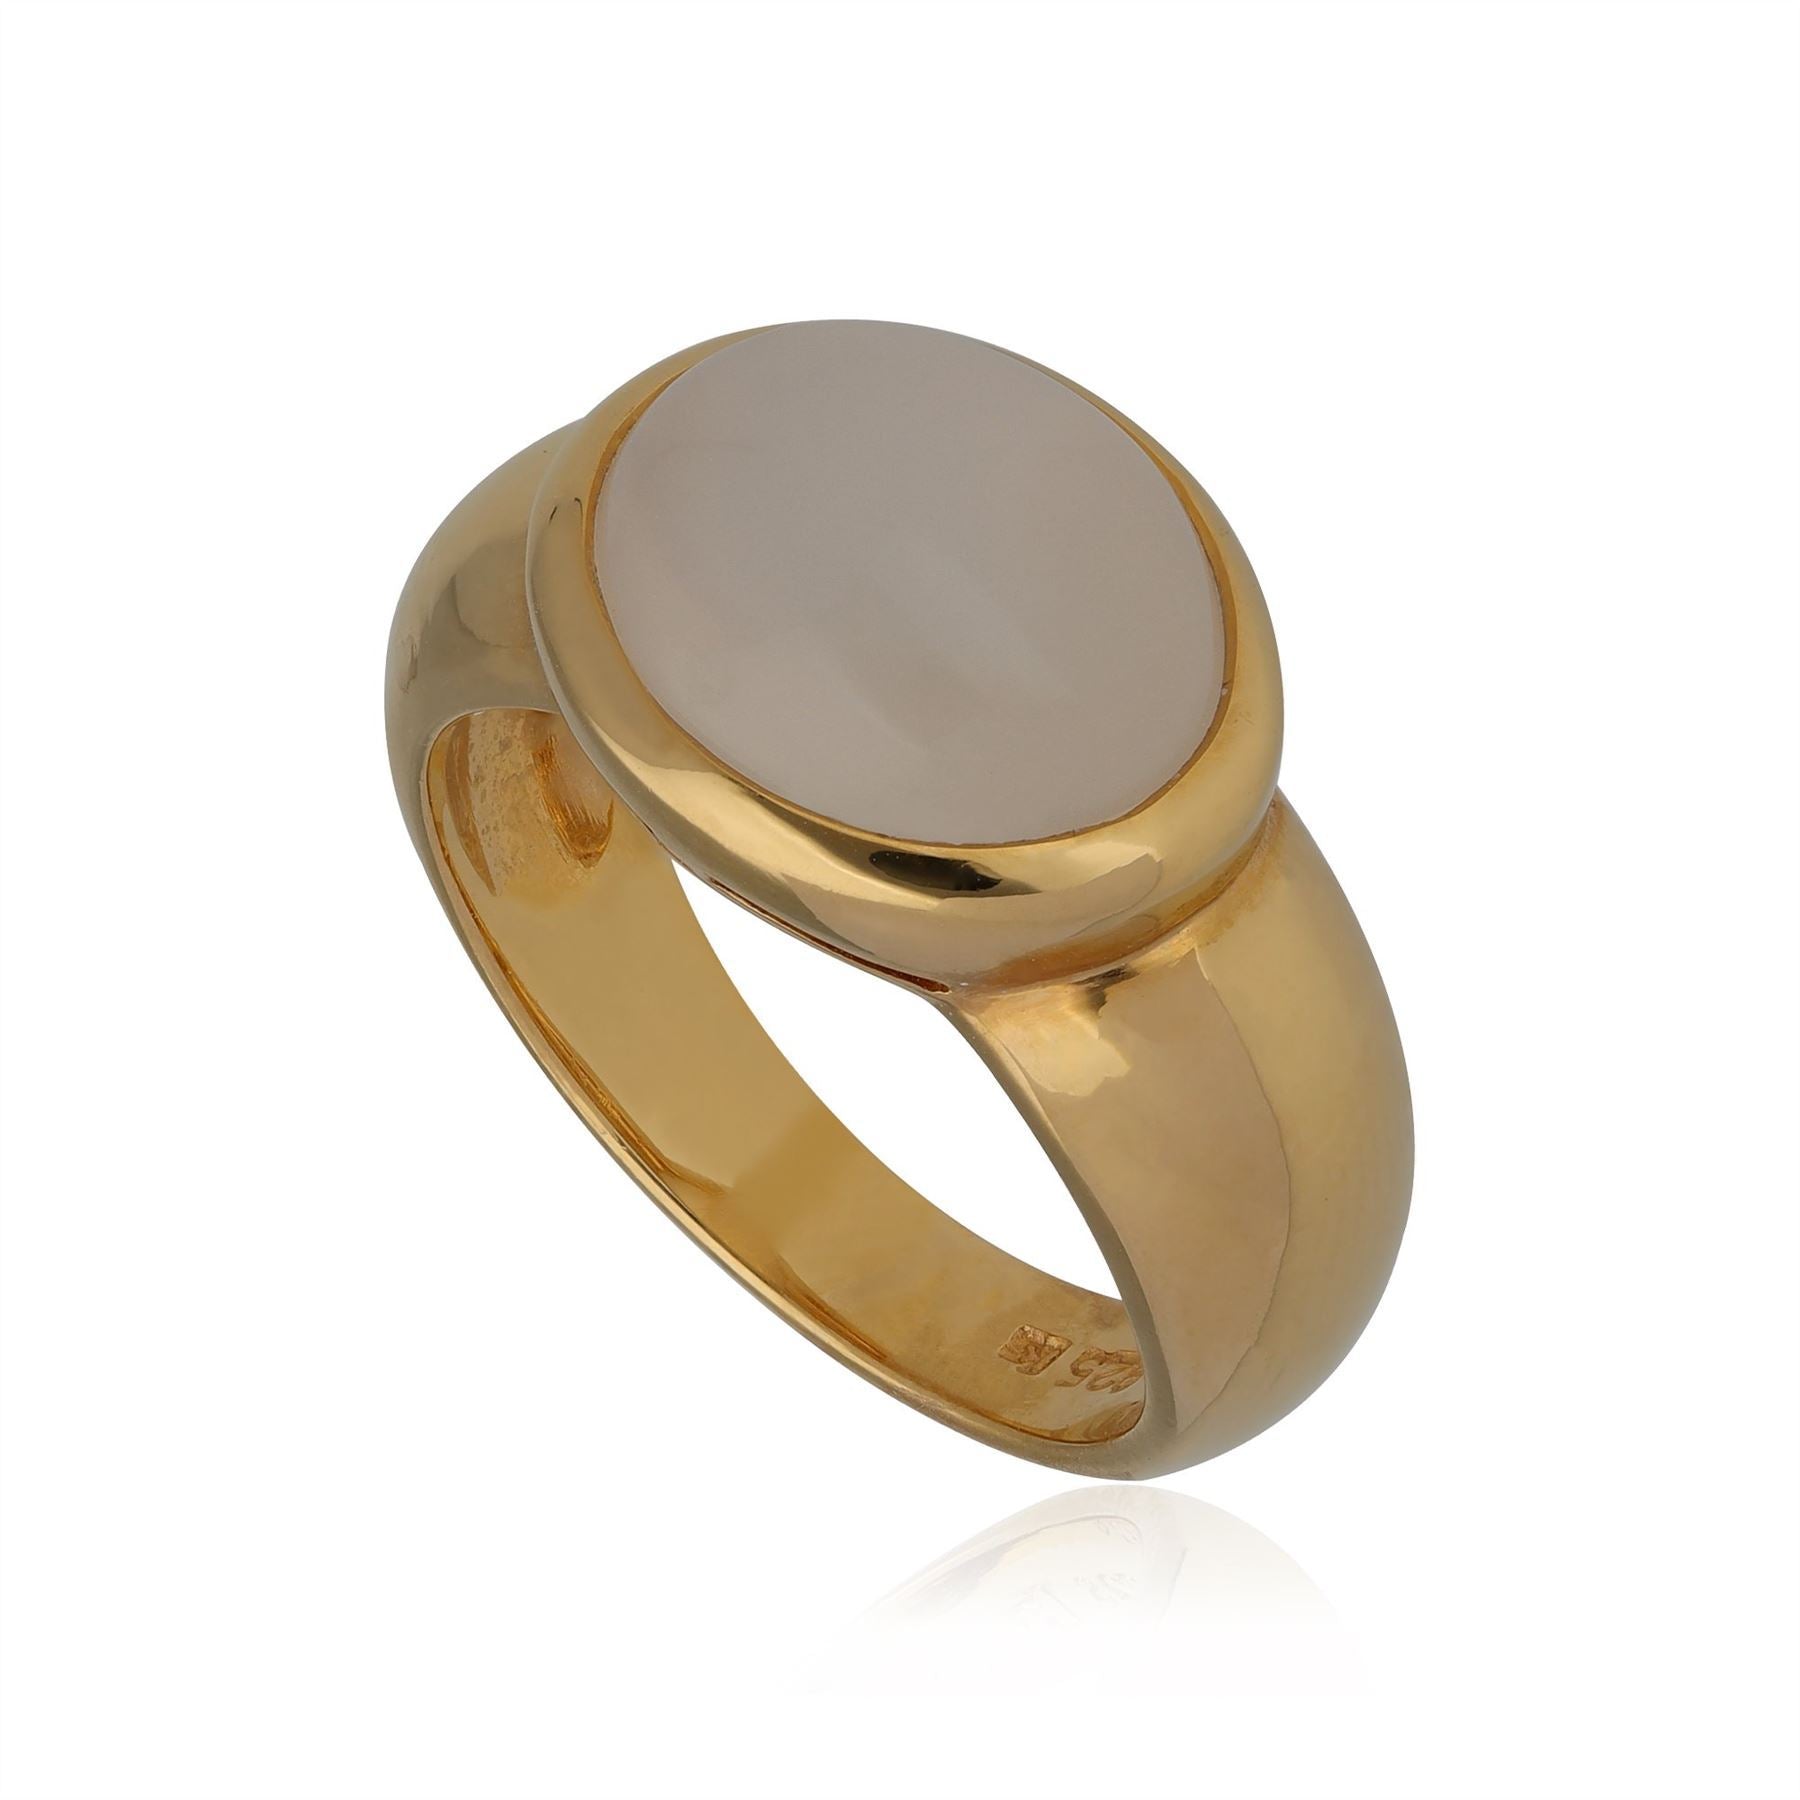 Kosmos Moonstone Cocktail Ring in Gold Plated Sterling Silver